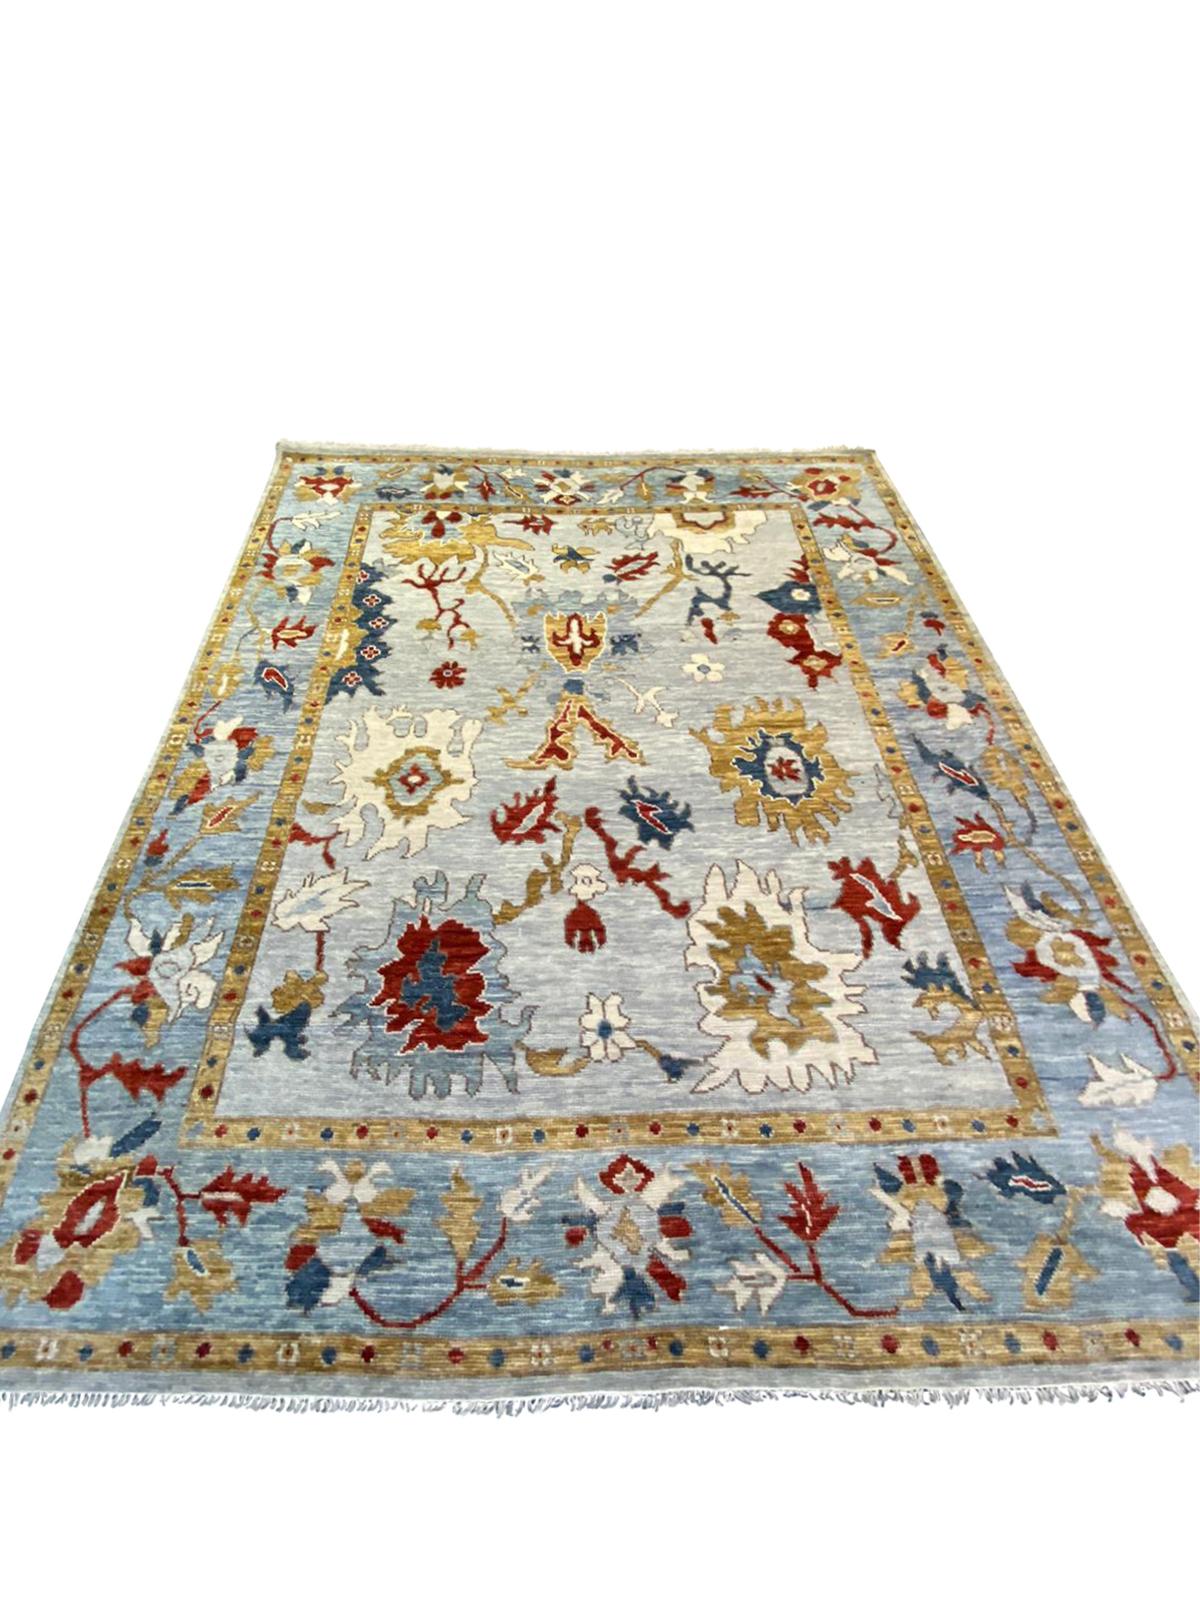 Indian Multi Colored Handmade Wool Rug  in Modern Oushak Design by Gordian For Sale